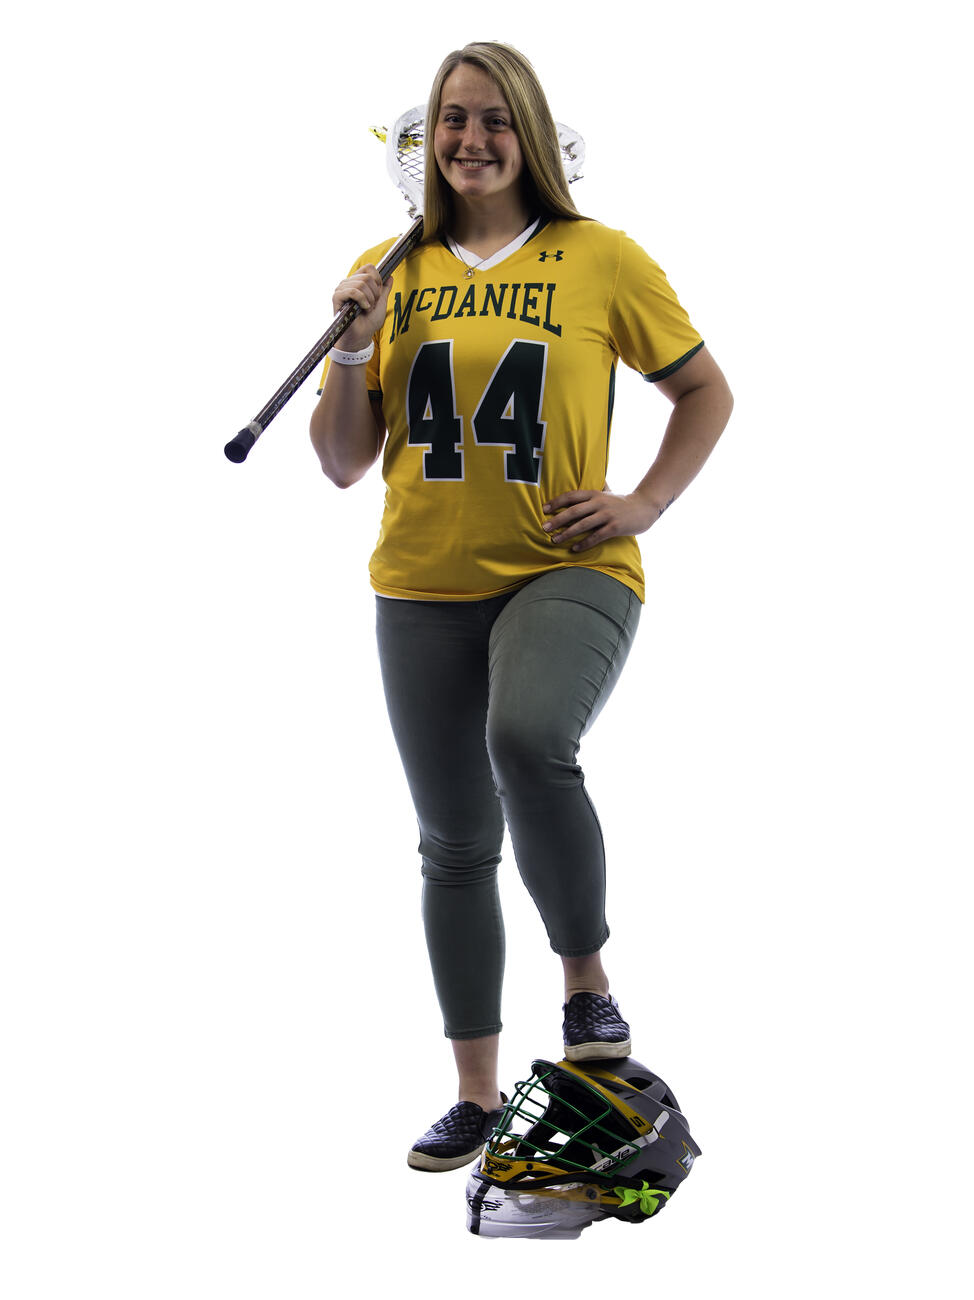 Hannah Miller poses with a lacrosse stick over her shoulder and her foot on a helmet.